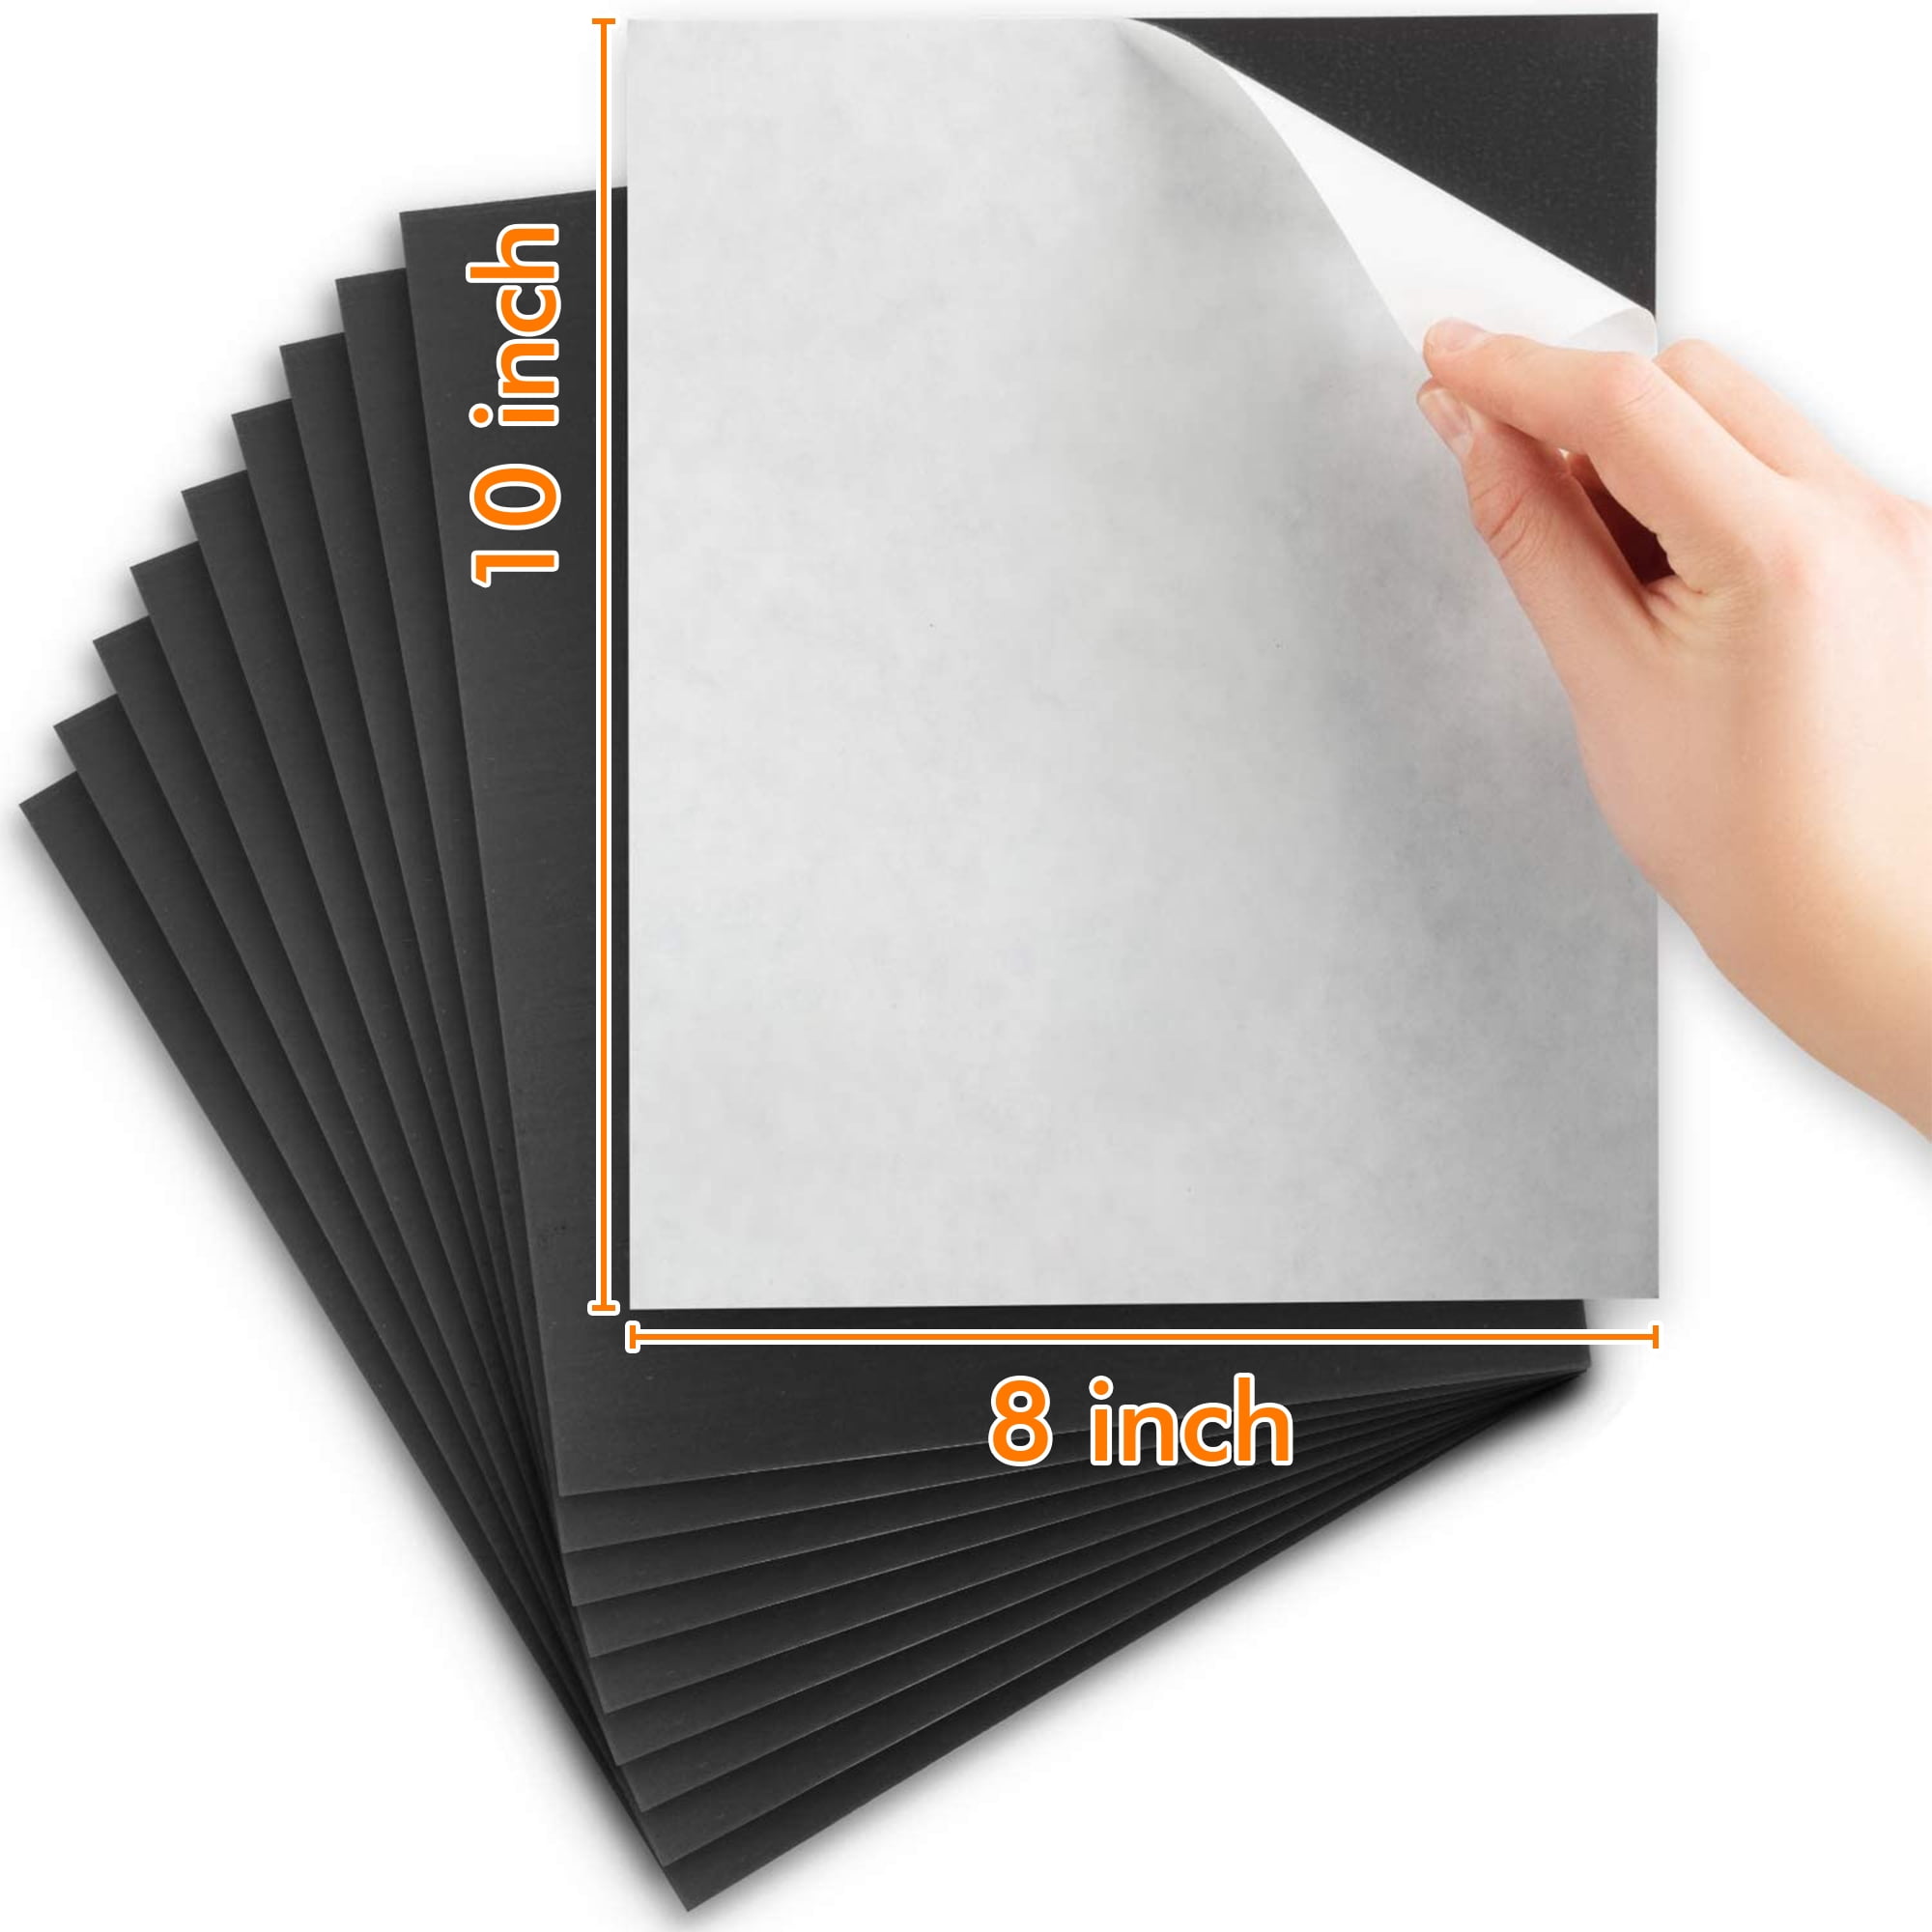 Verve Magnetic Sheets with Adhesive Backing, 8 x 10 inch Flexible Magnetic Paper for Crafts, Photos, and DIY Projects, 10 Pack